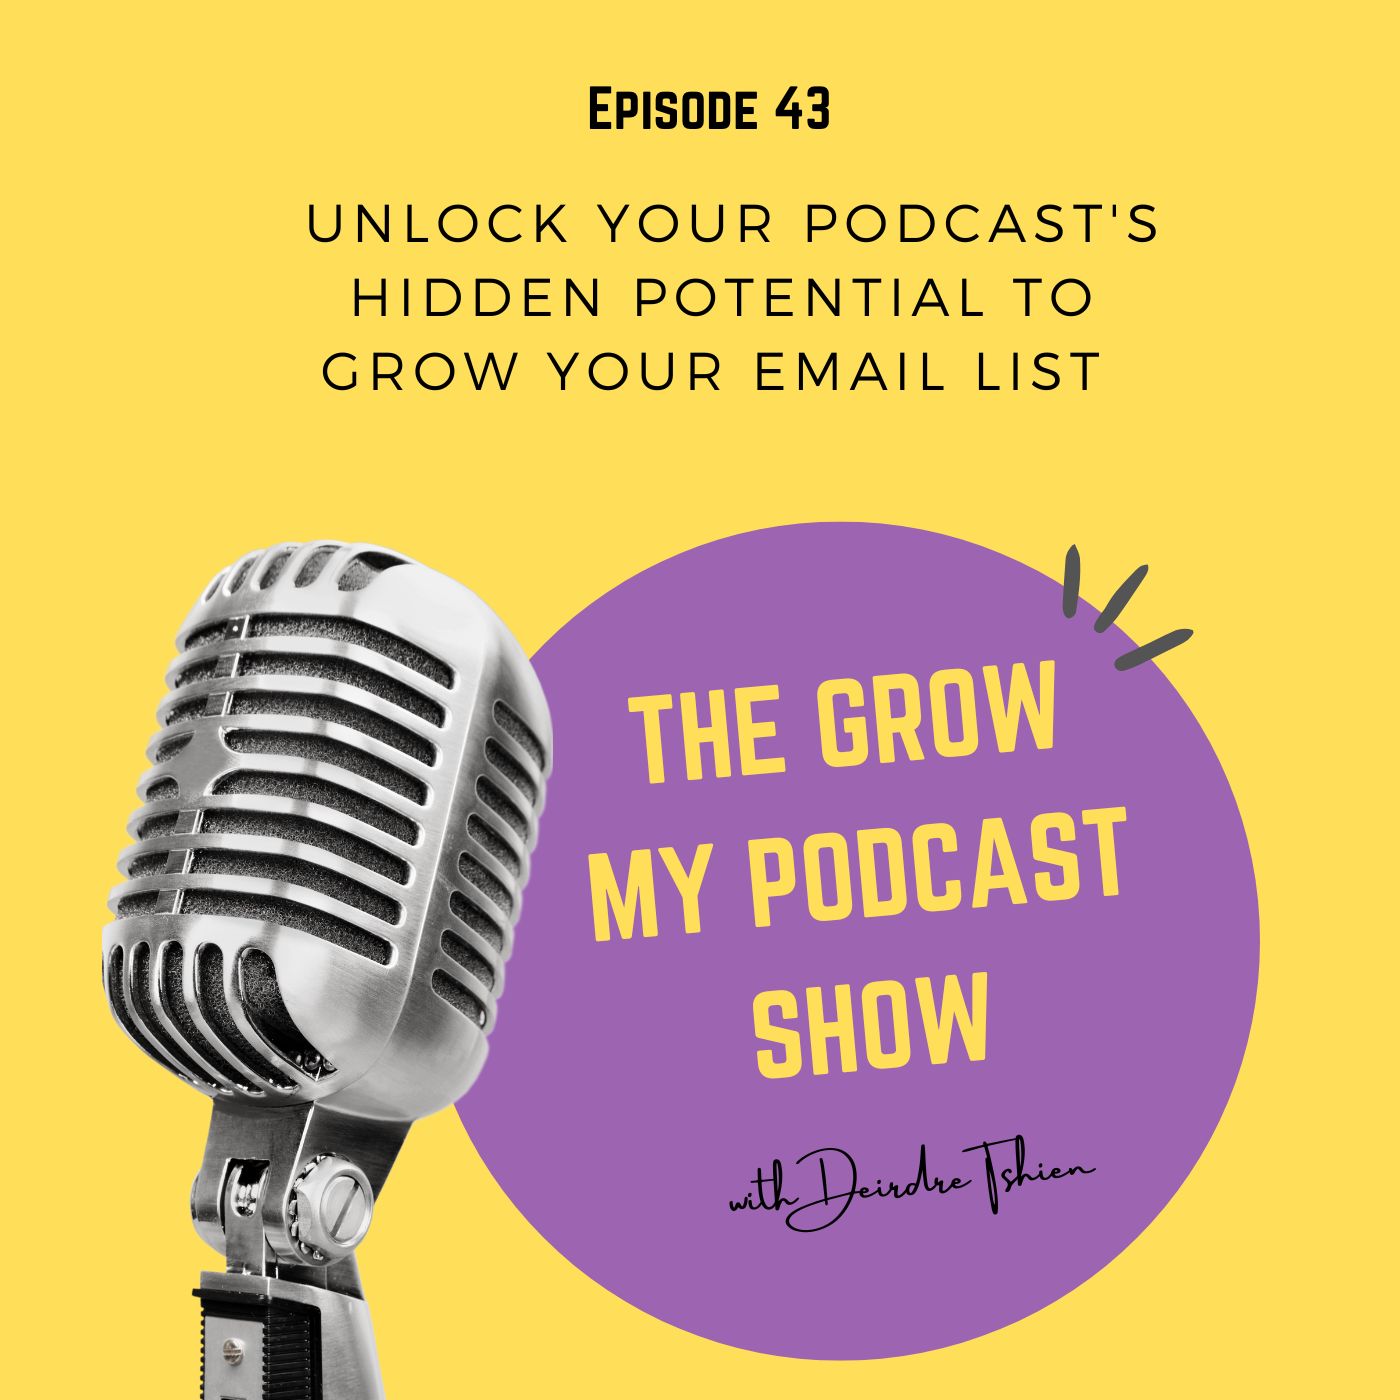 43. Unlock your podcast's hidden potential to grow your email list Image